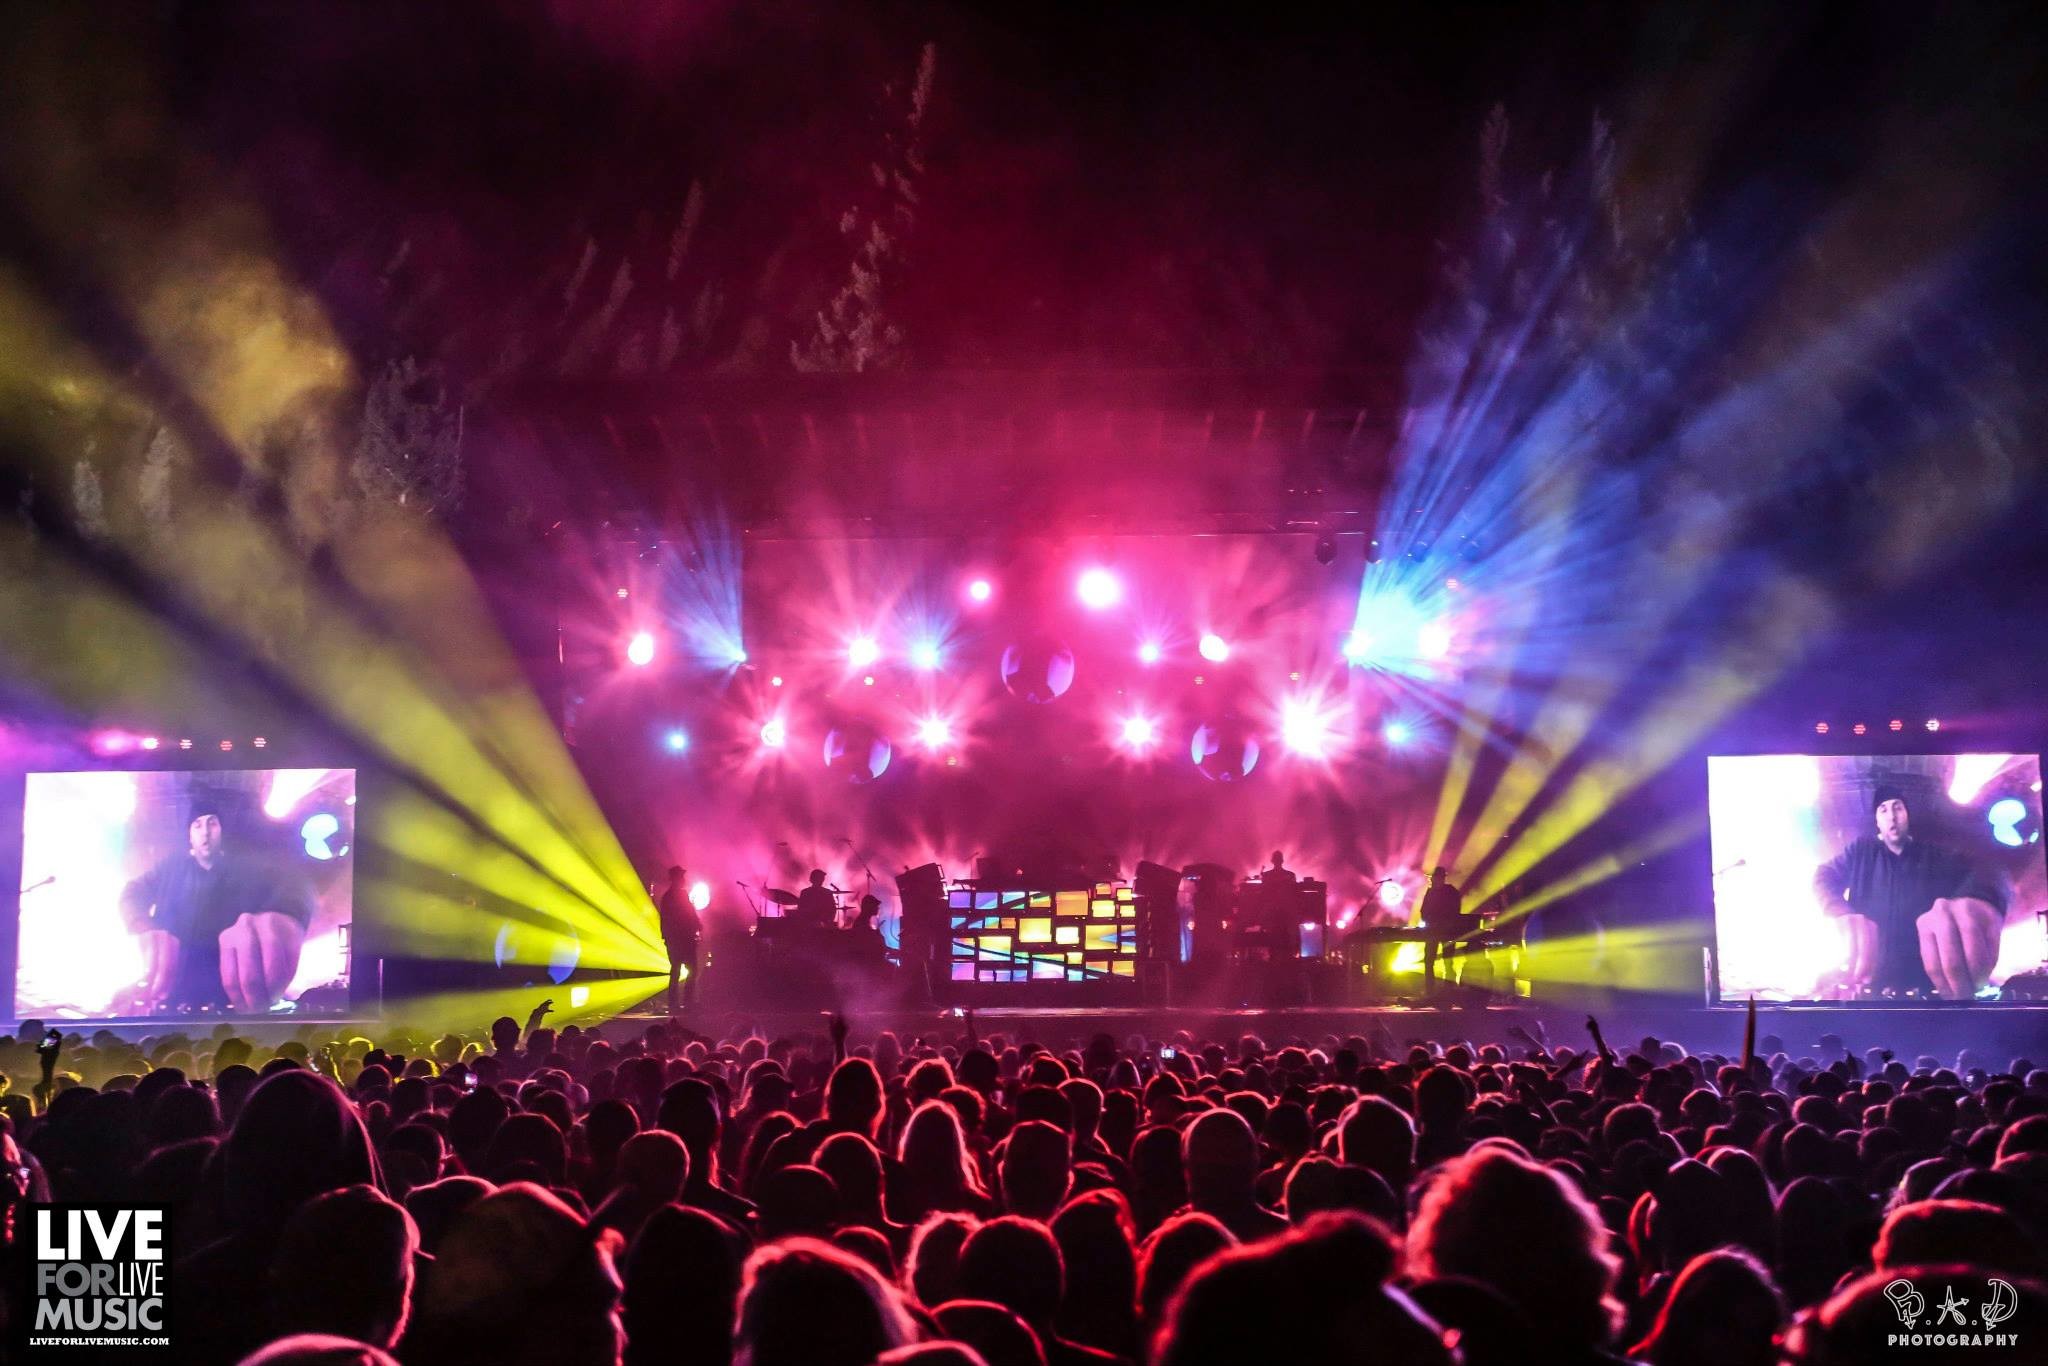 2048x1366 Telluride Encapsulated Everything Pretty Lights Music Set Out To .